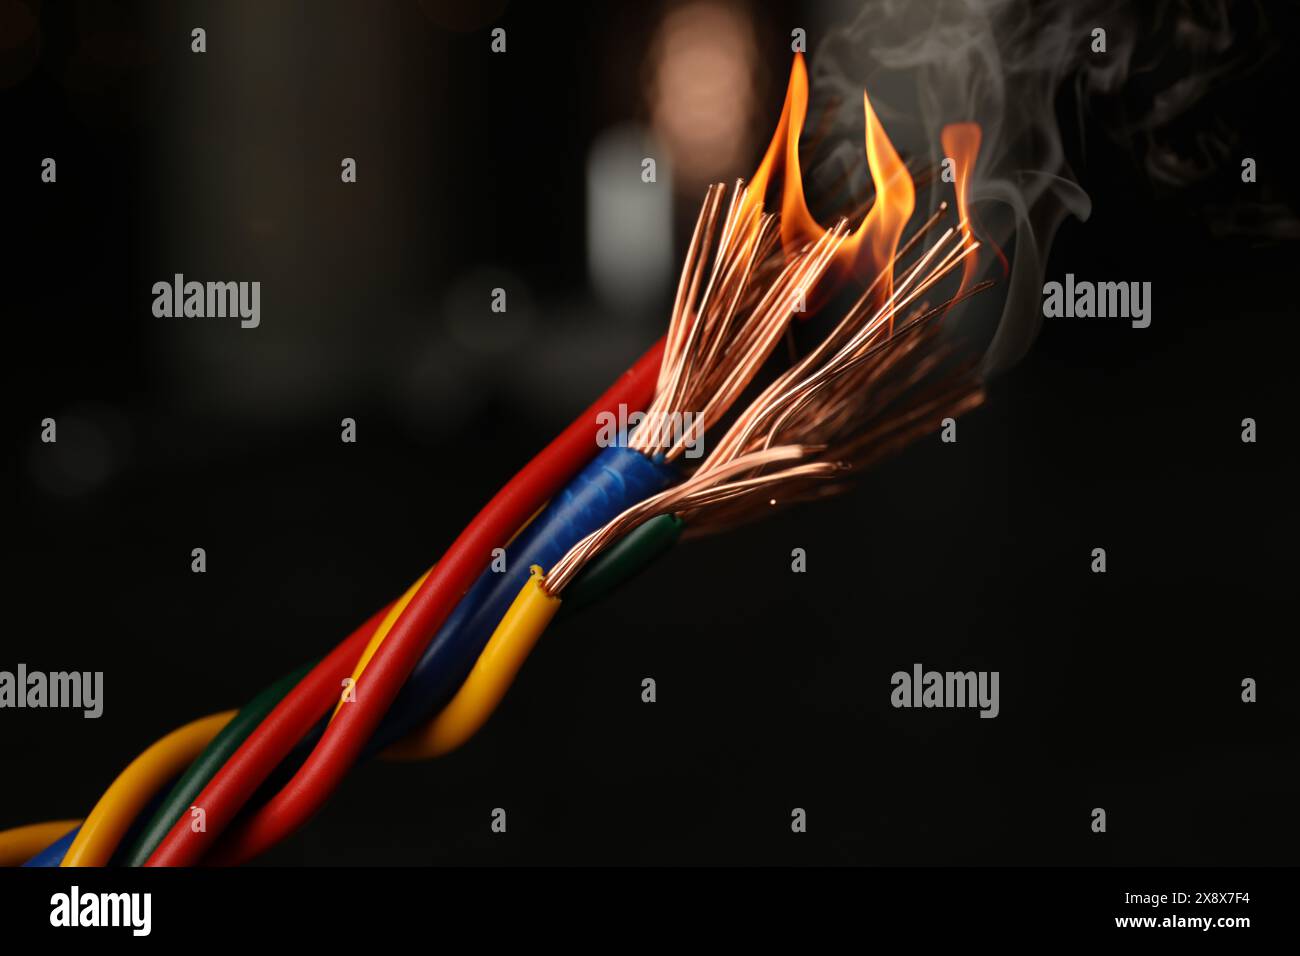 Electrical wire burning on dark background, closeup Stock Photo